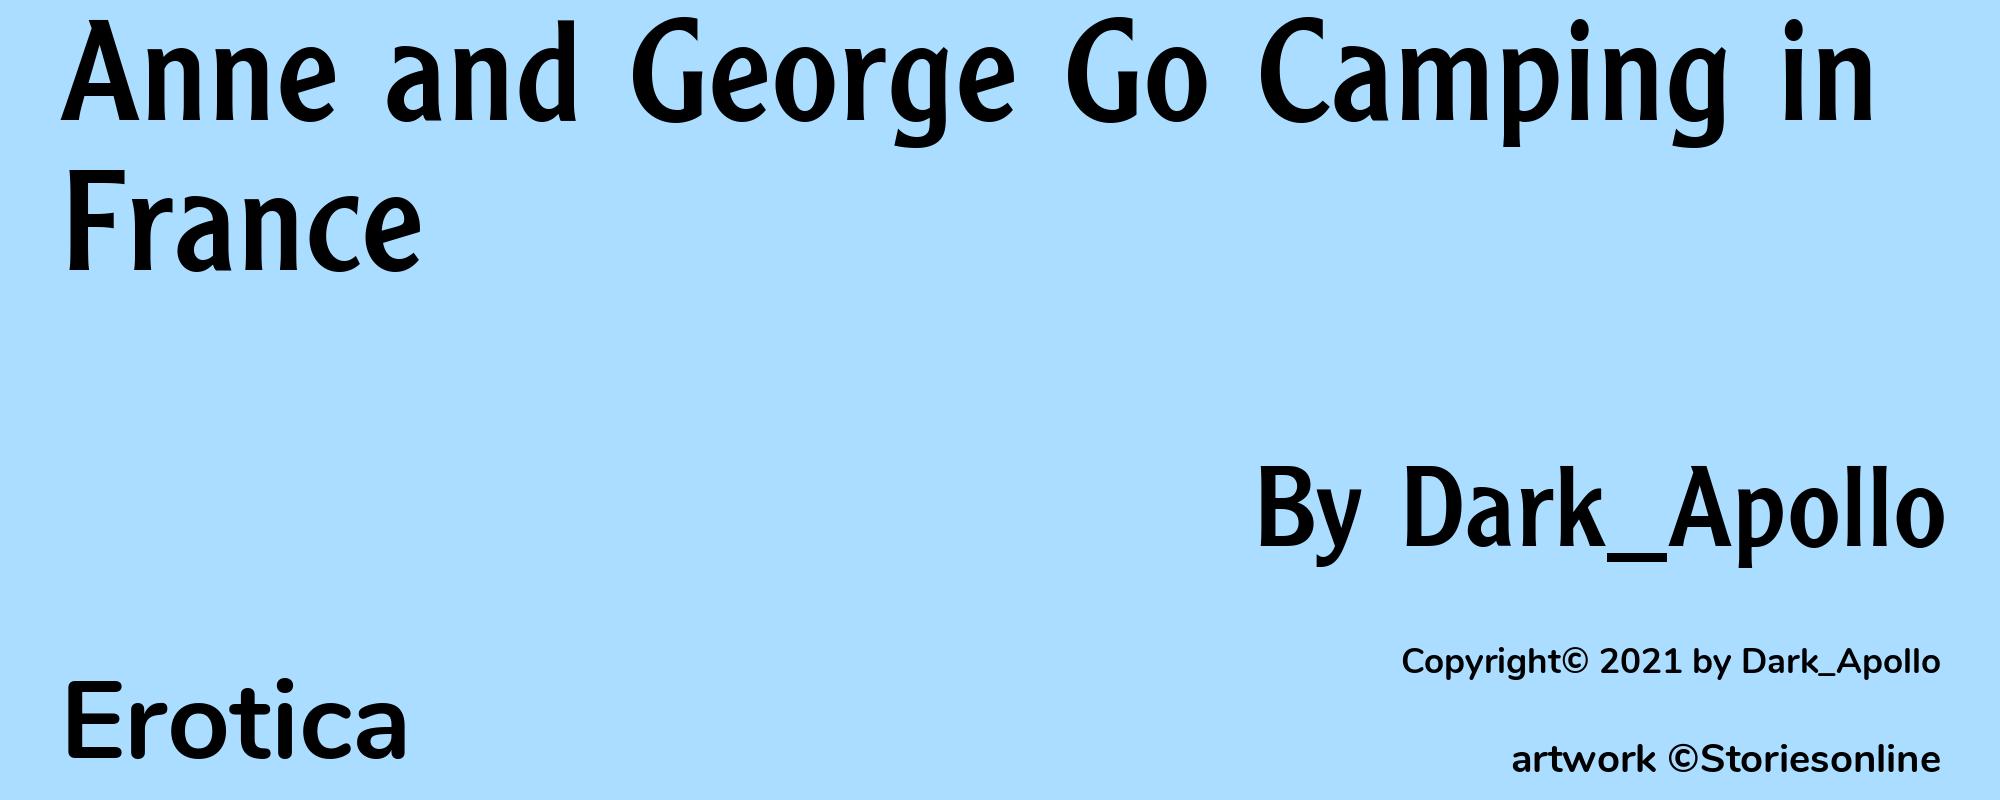 Anne and George Go Camping in France - Cover